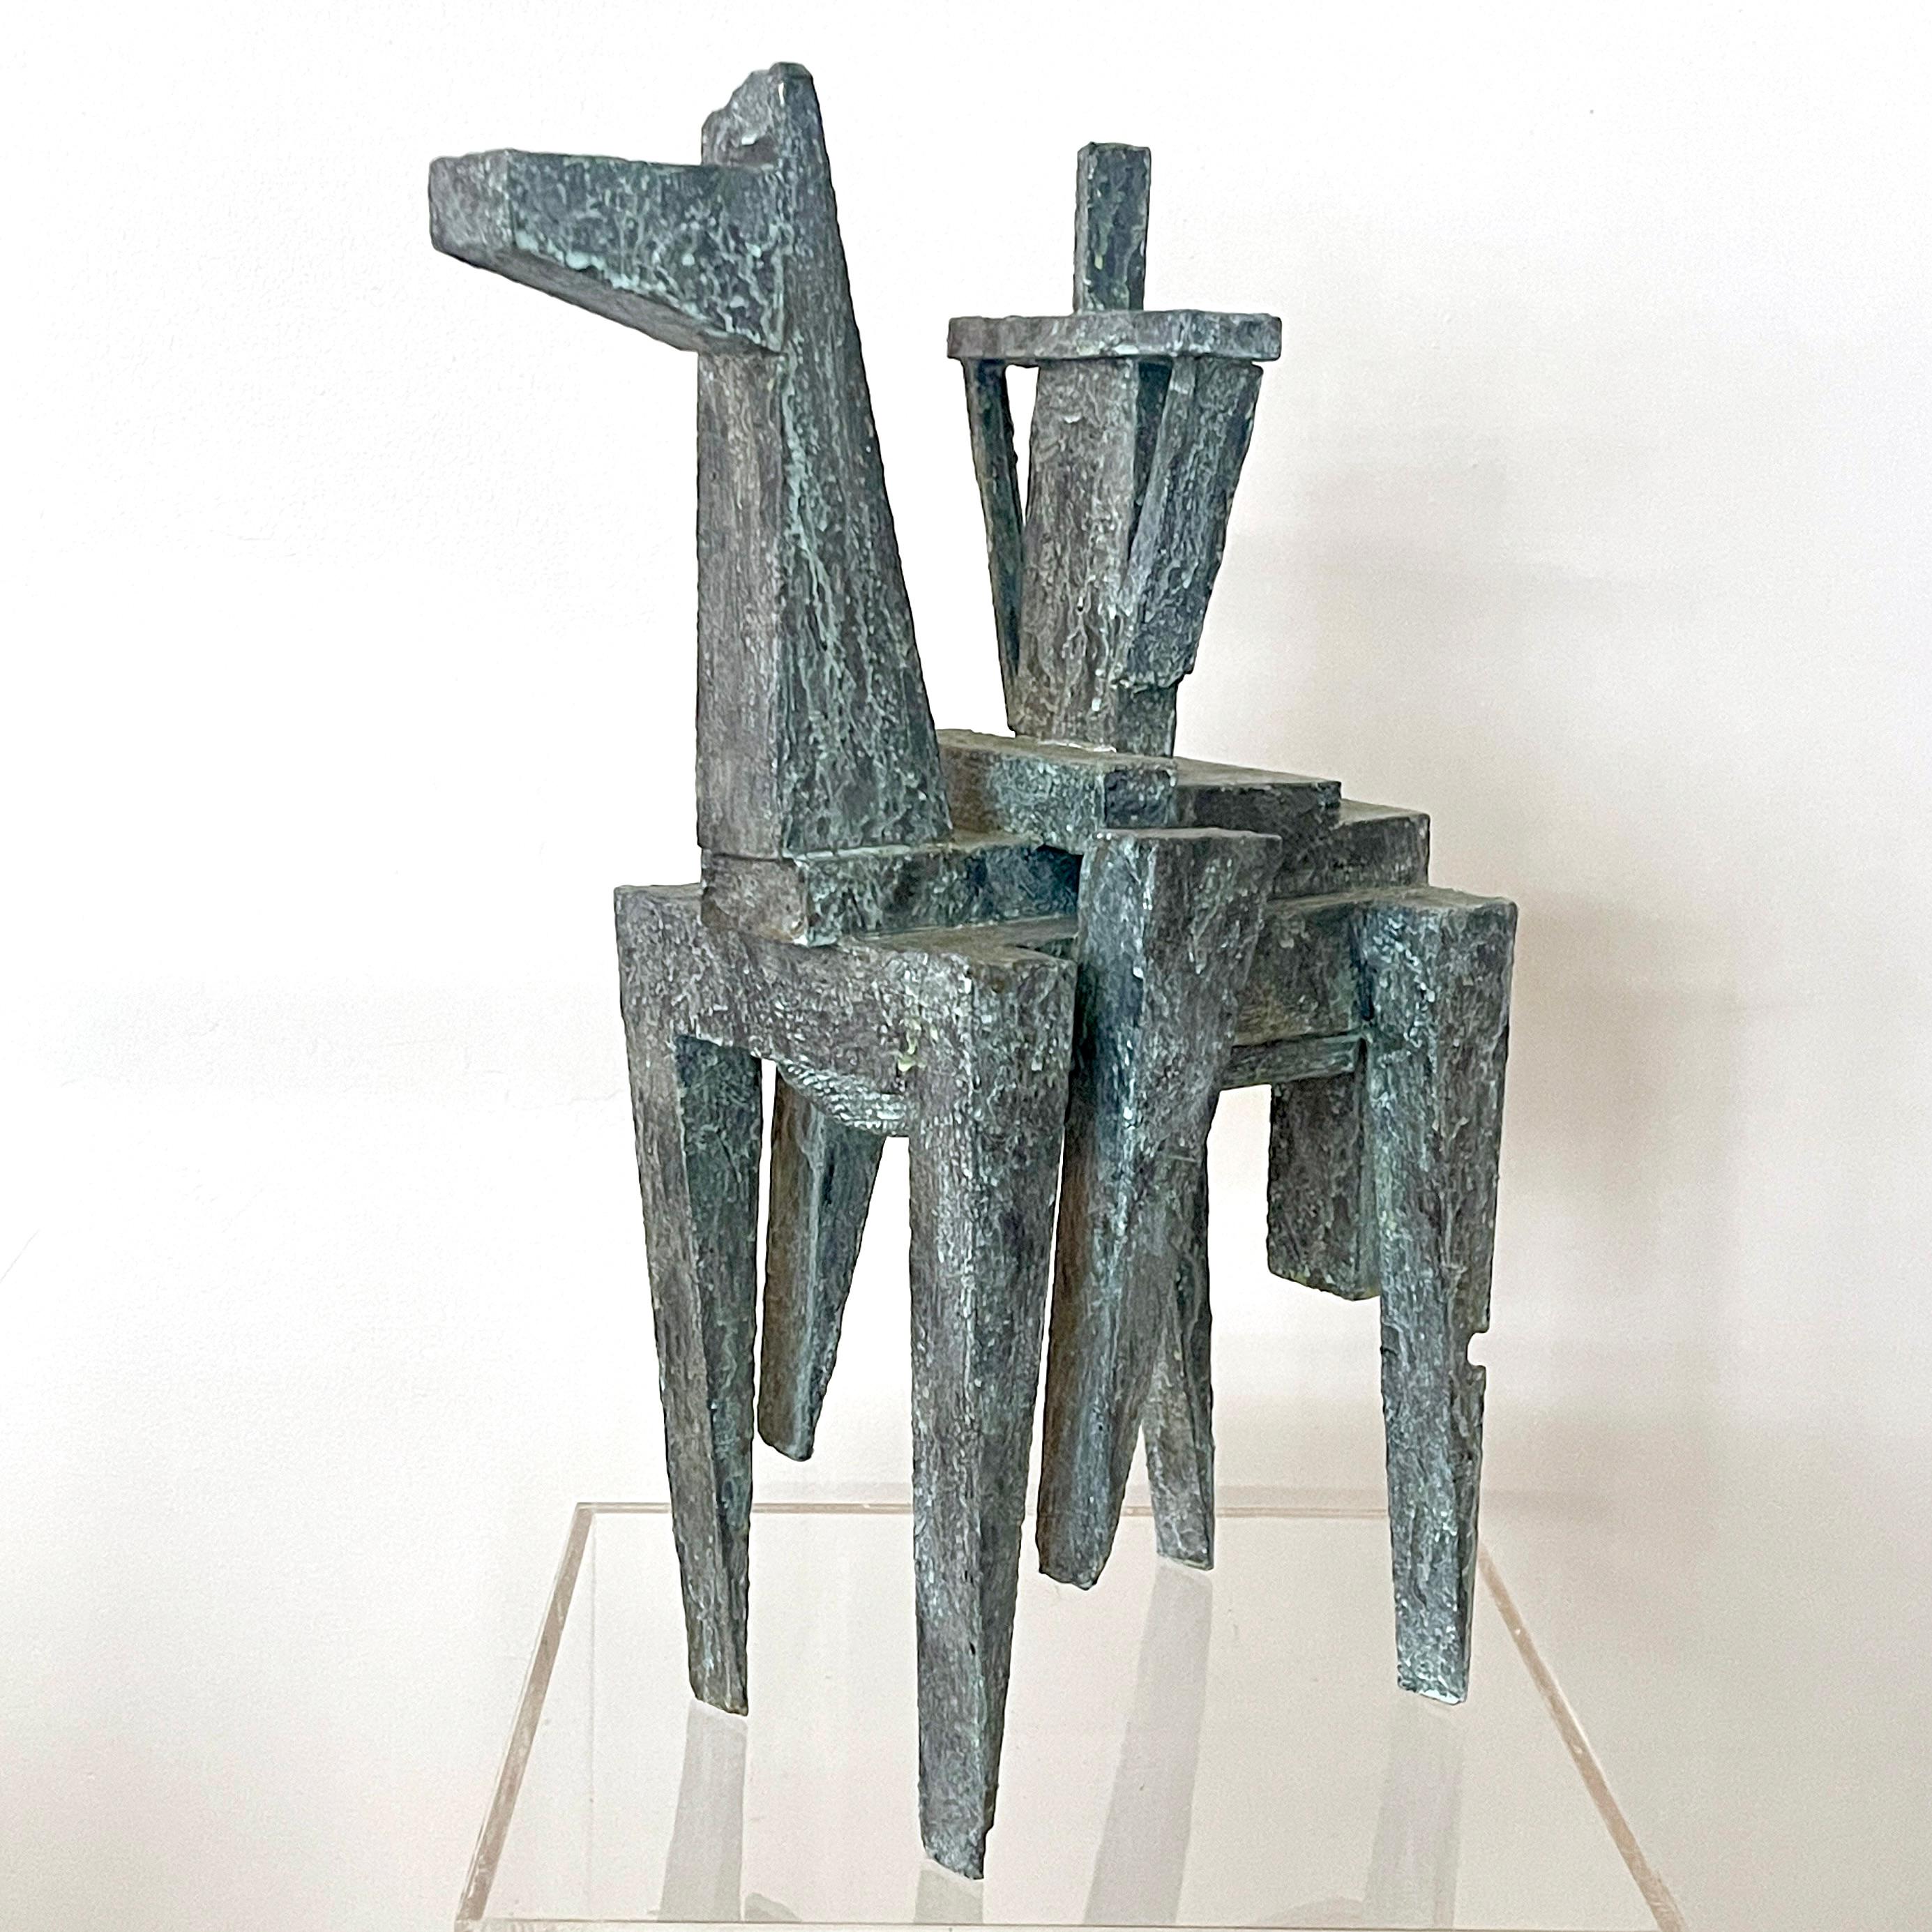 Modernist Cubist Sculpture by Bill Low with Weathered Bronze Finish For Sale 7